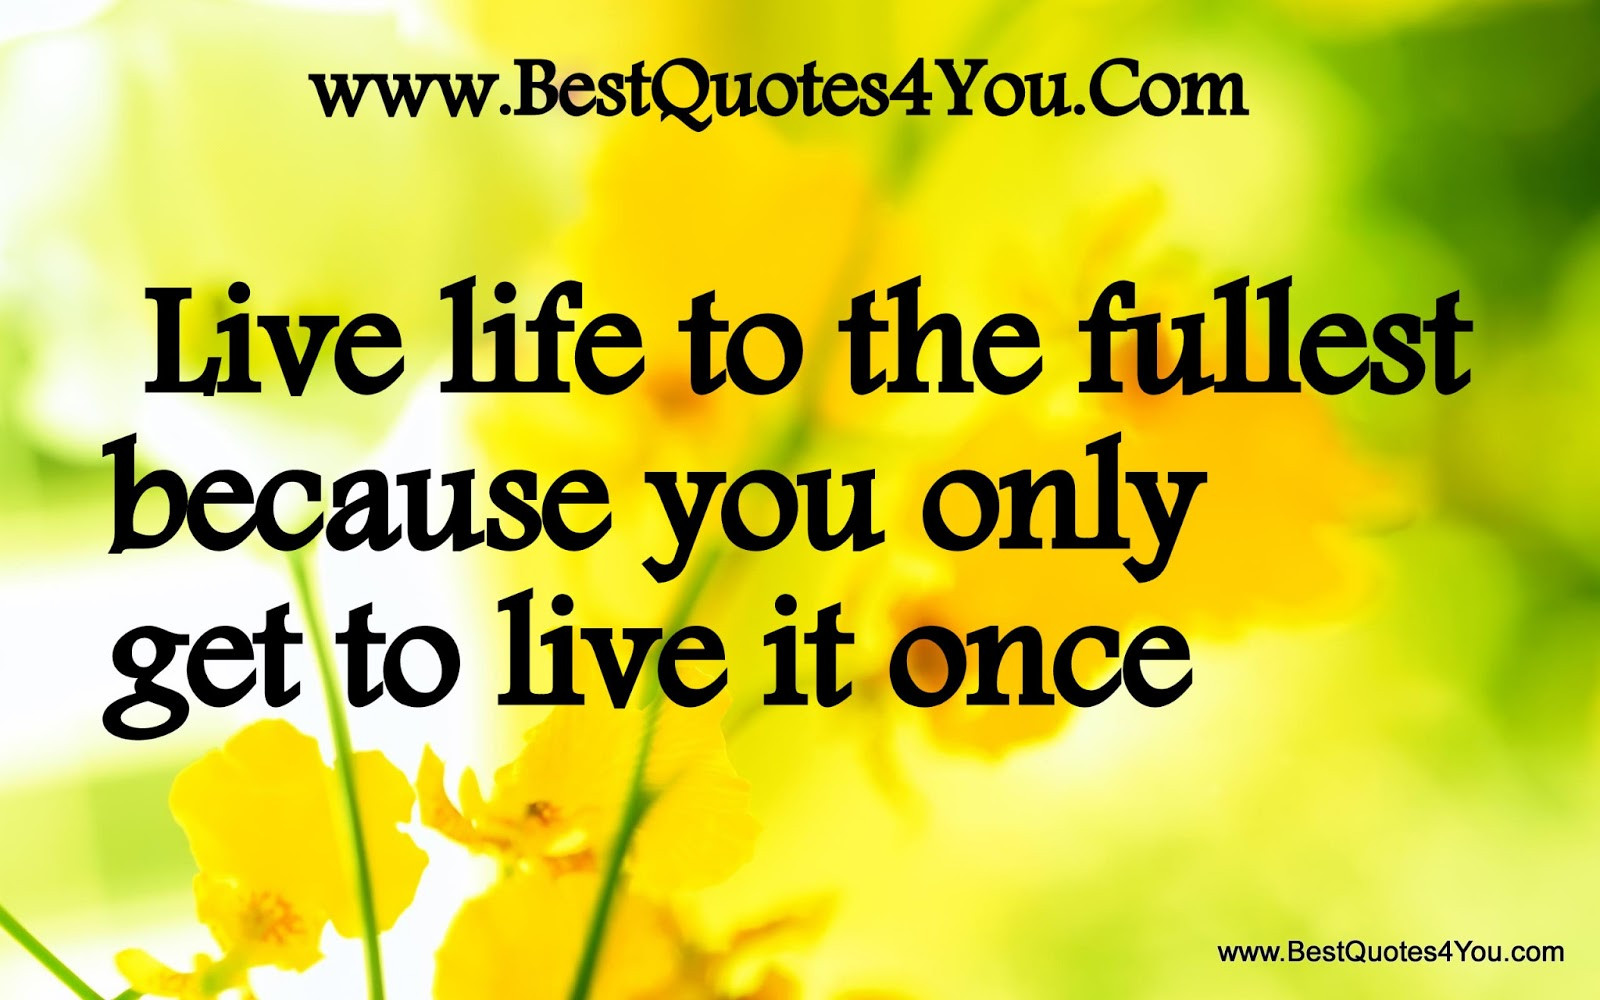 Quotes About Living Life To Its Fullest
 Quotes About Living Your Life To The Fullest QuotesGram